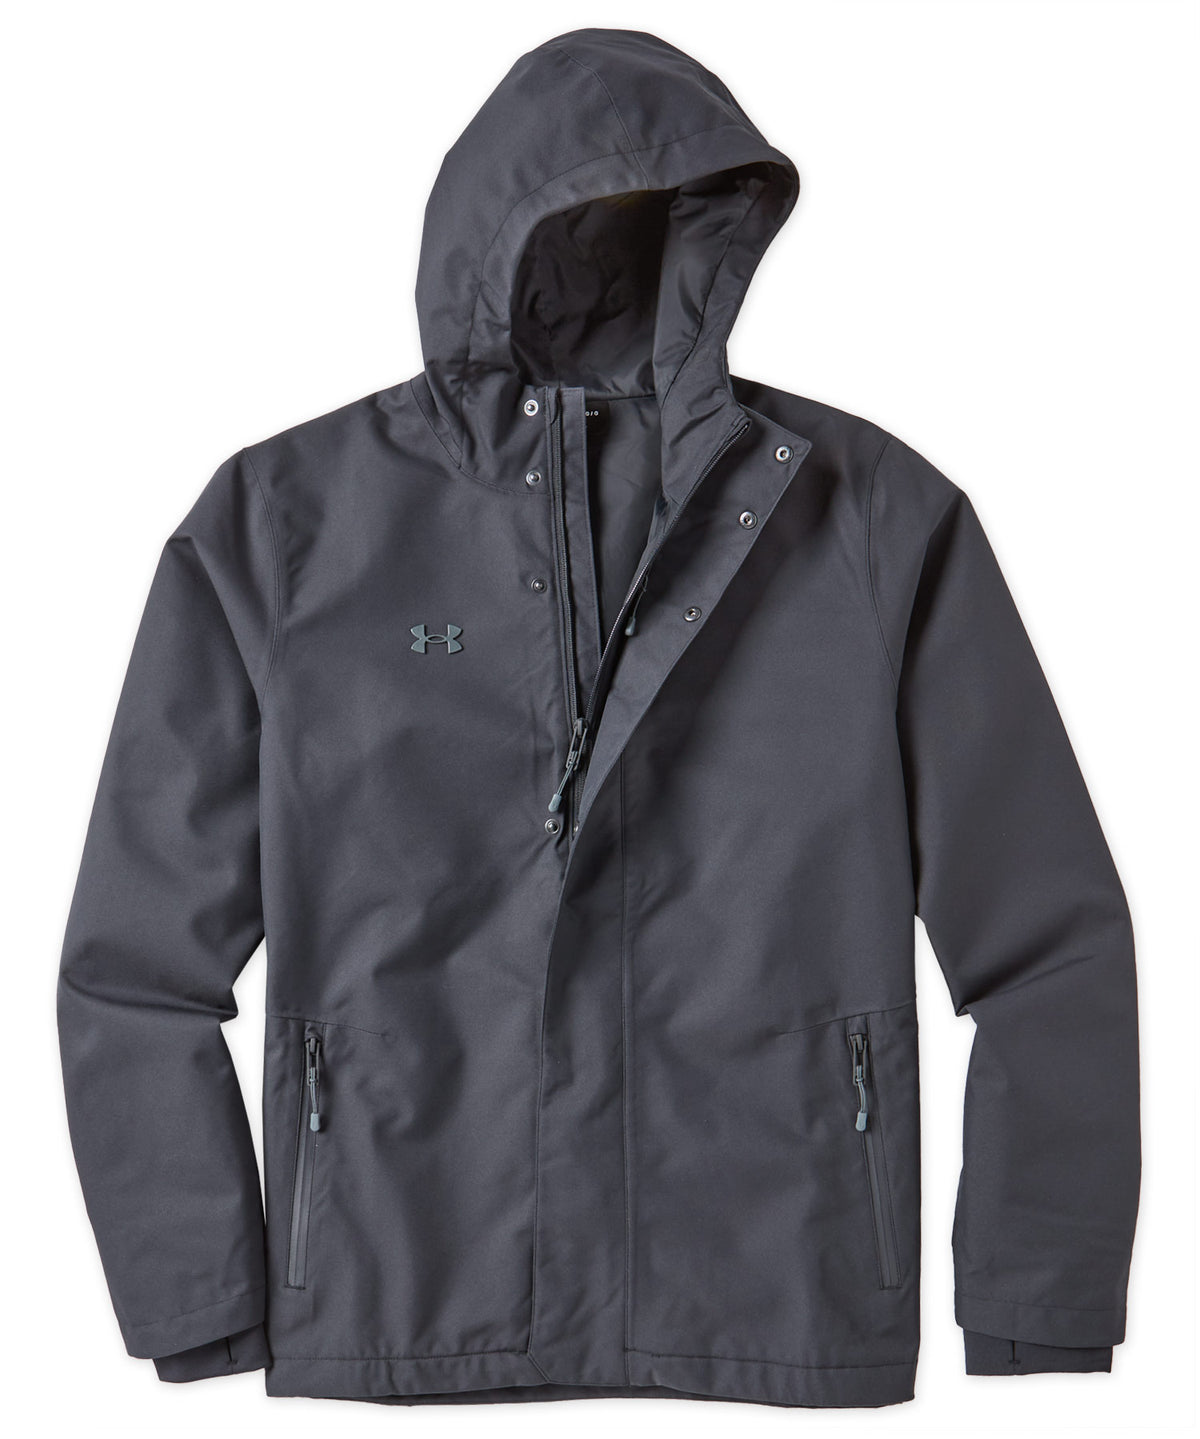 Under Armour Stormproof Lined Rain Jacket, Big & Tall